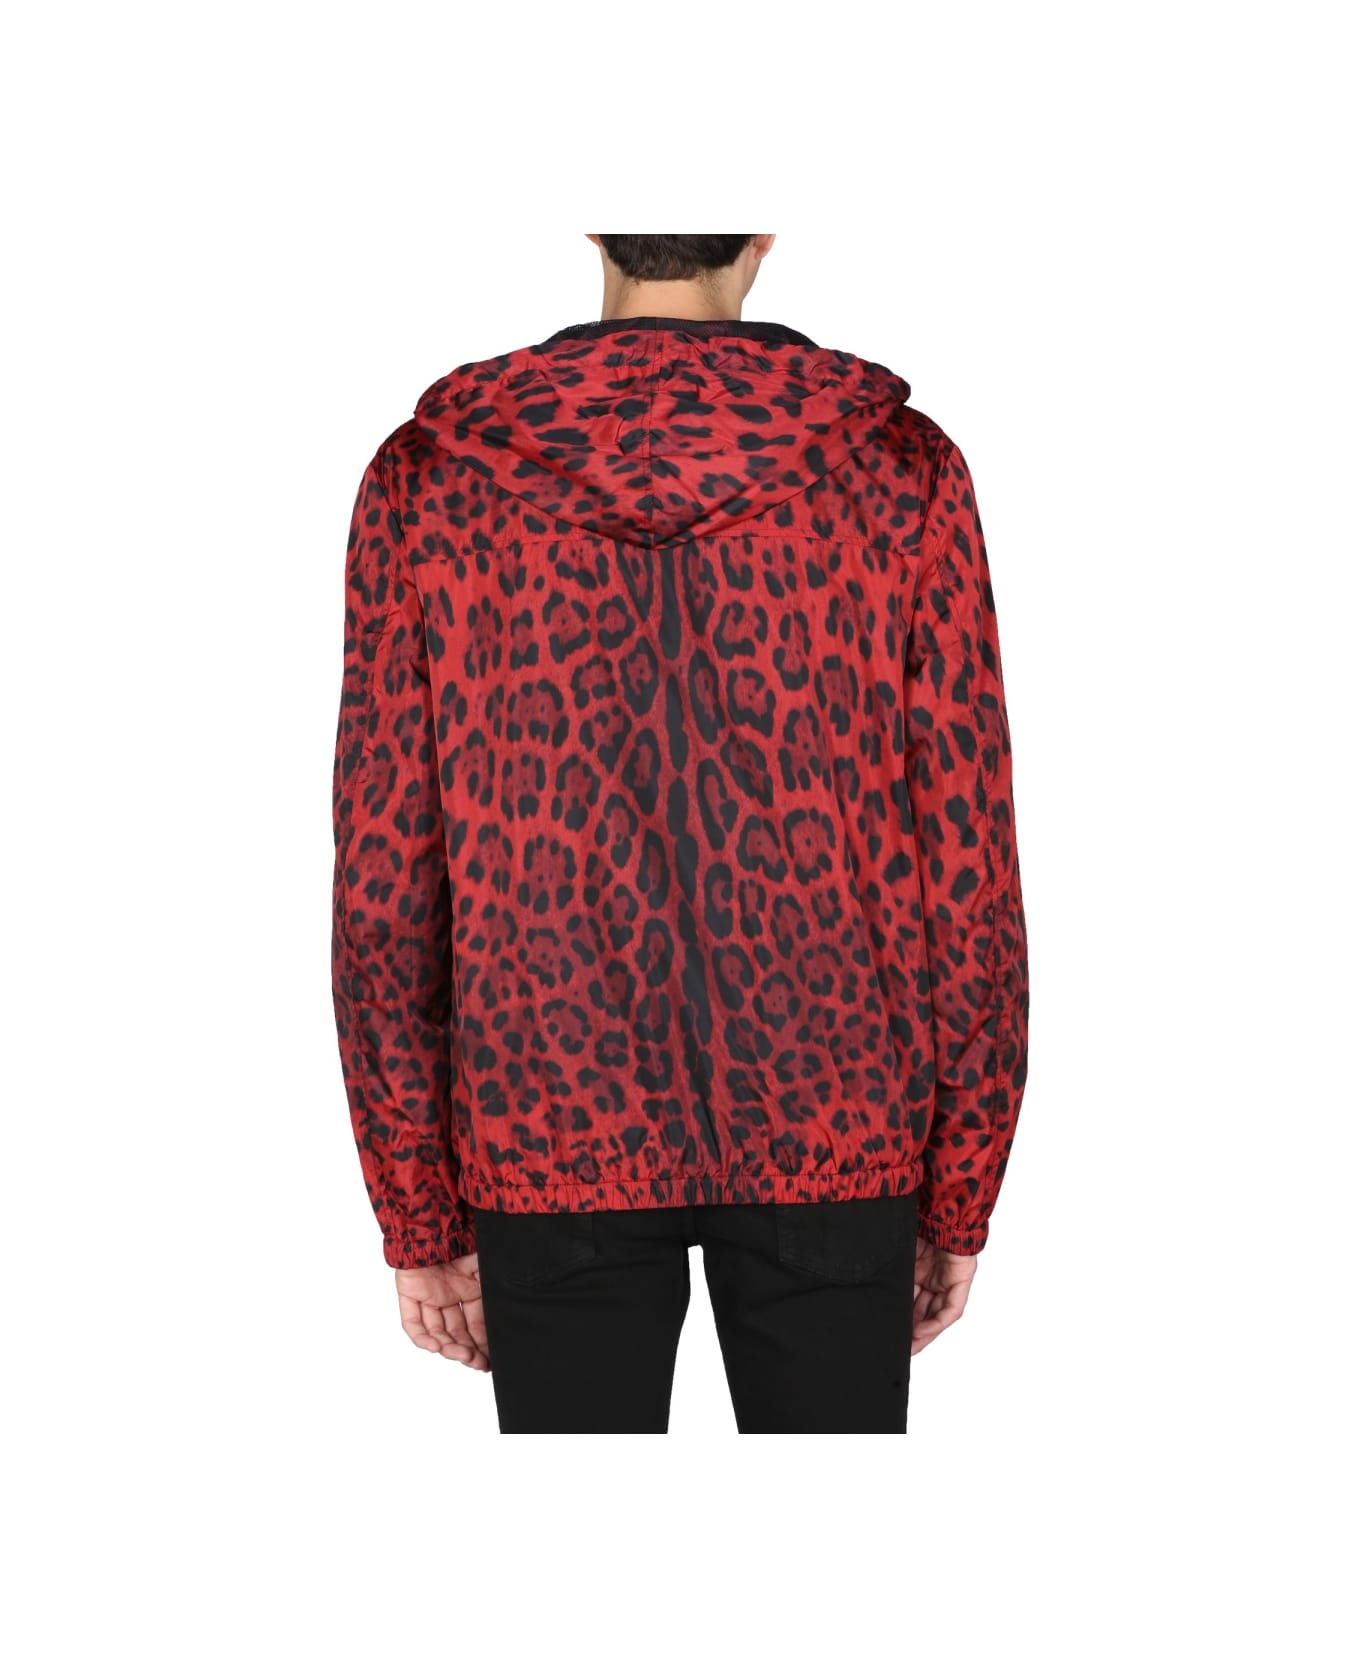 Dolce & Gabbana Jacket With Animal Print - RED